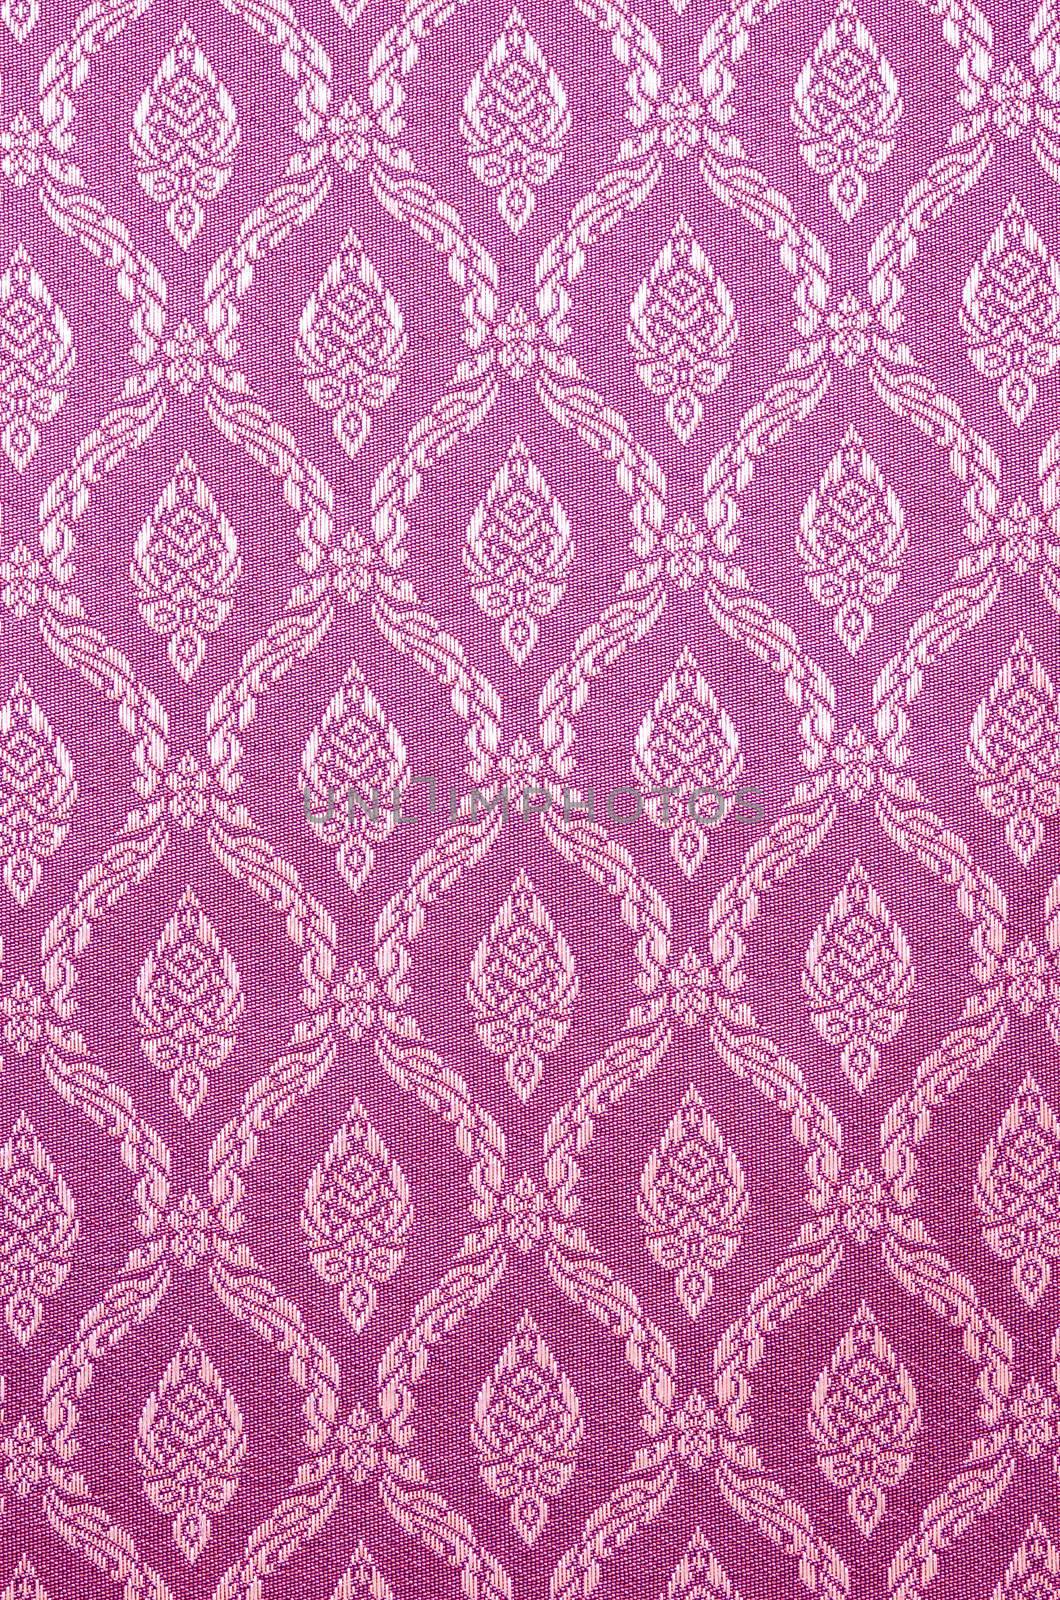 Beautiful traditional fabric Thai design texture or background.